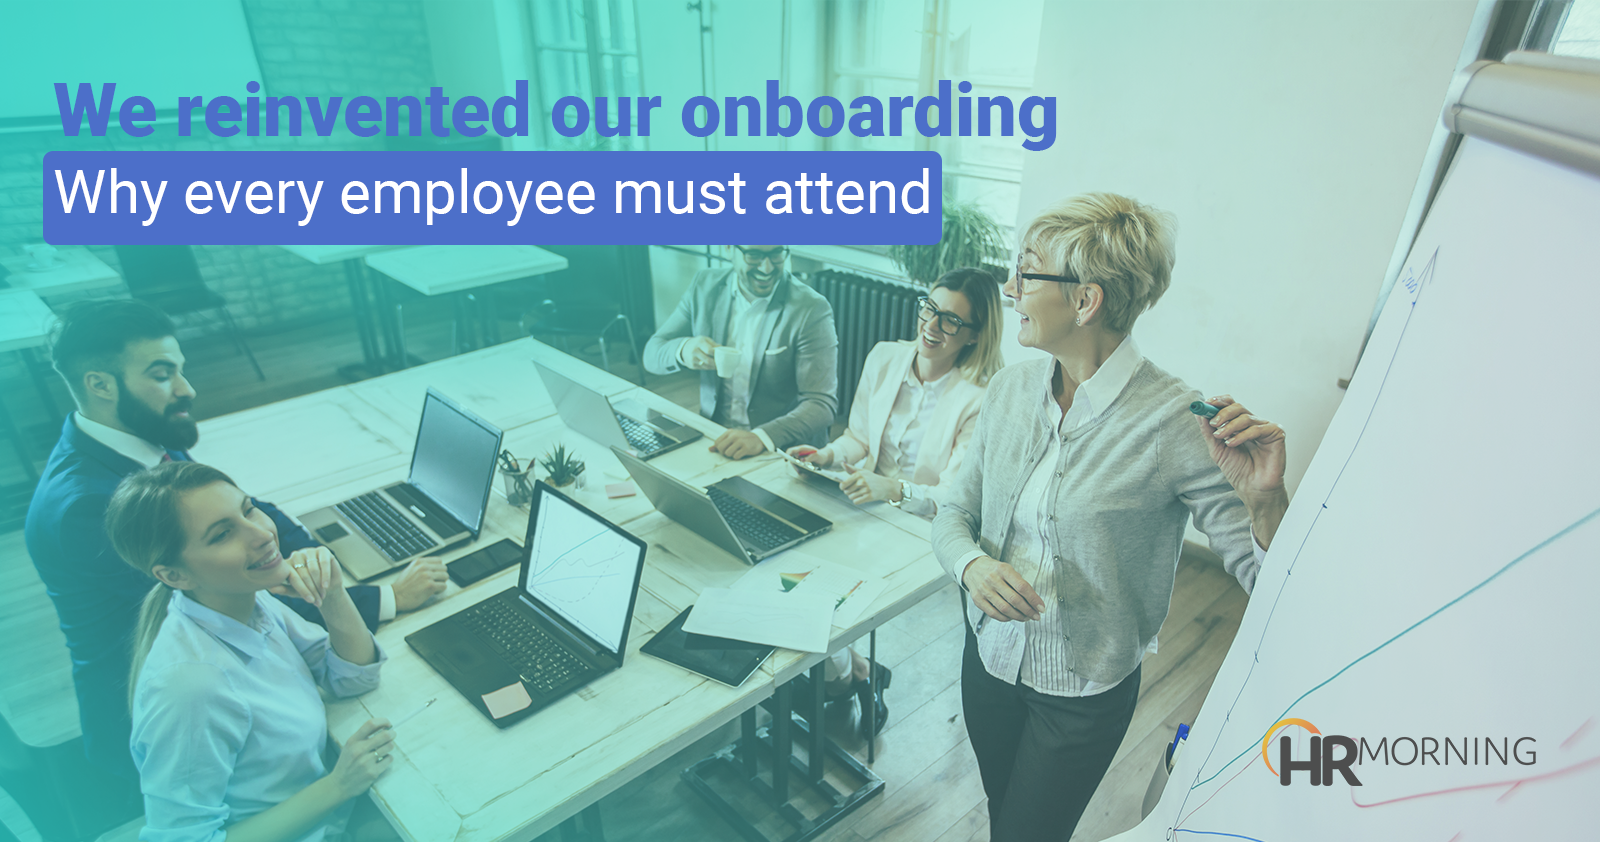 reinvented our onboarding program every employee must attend